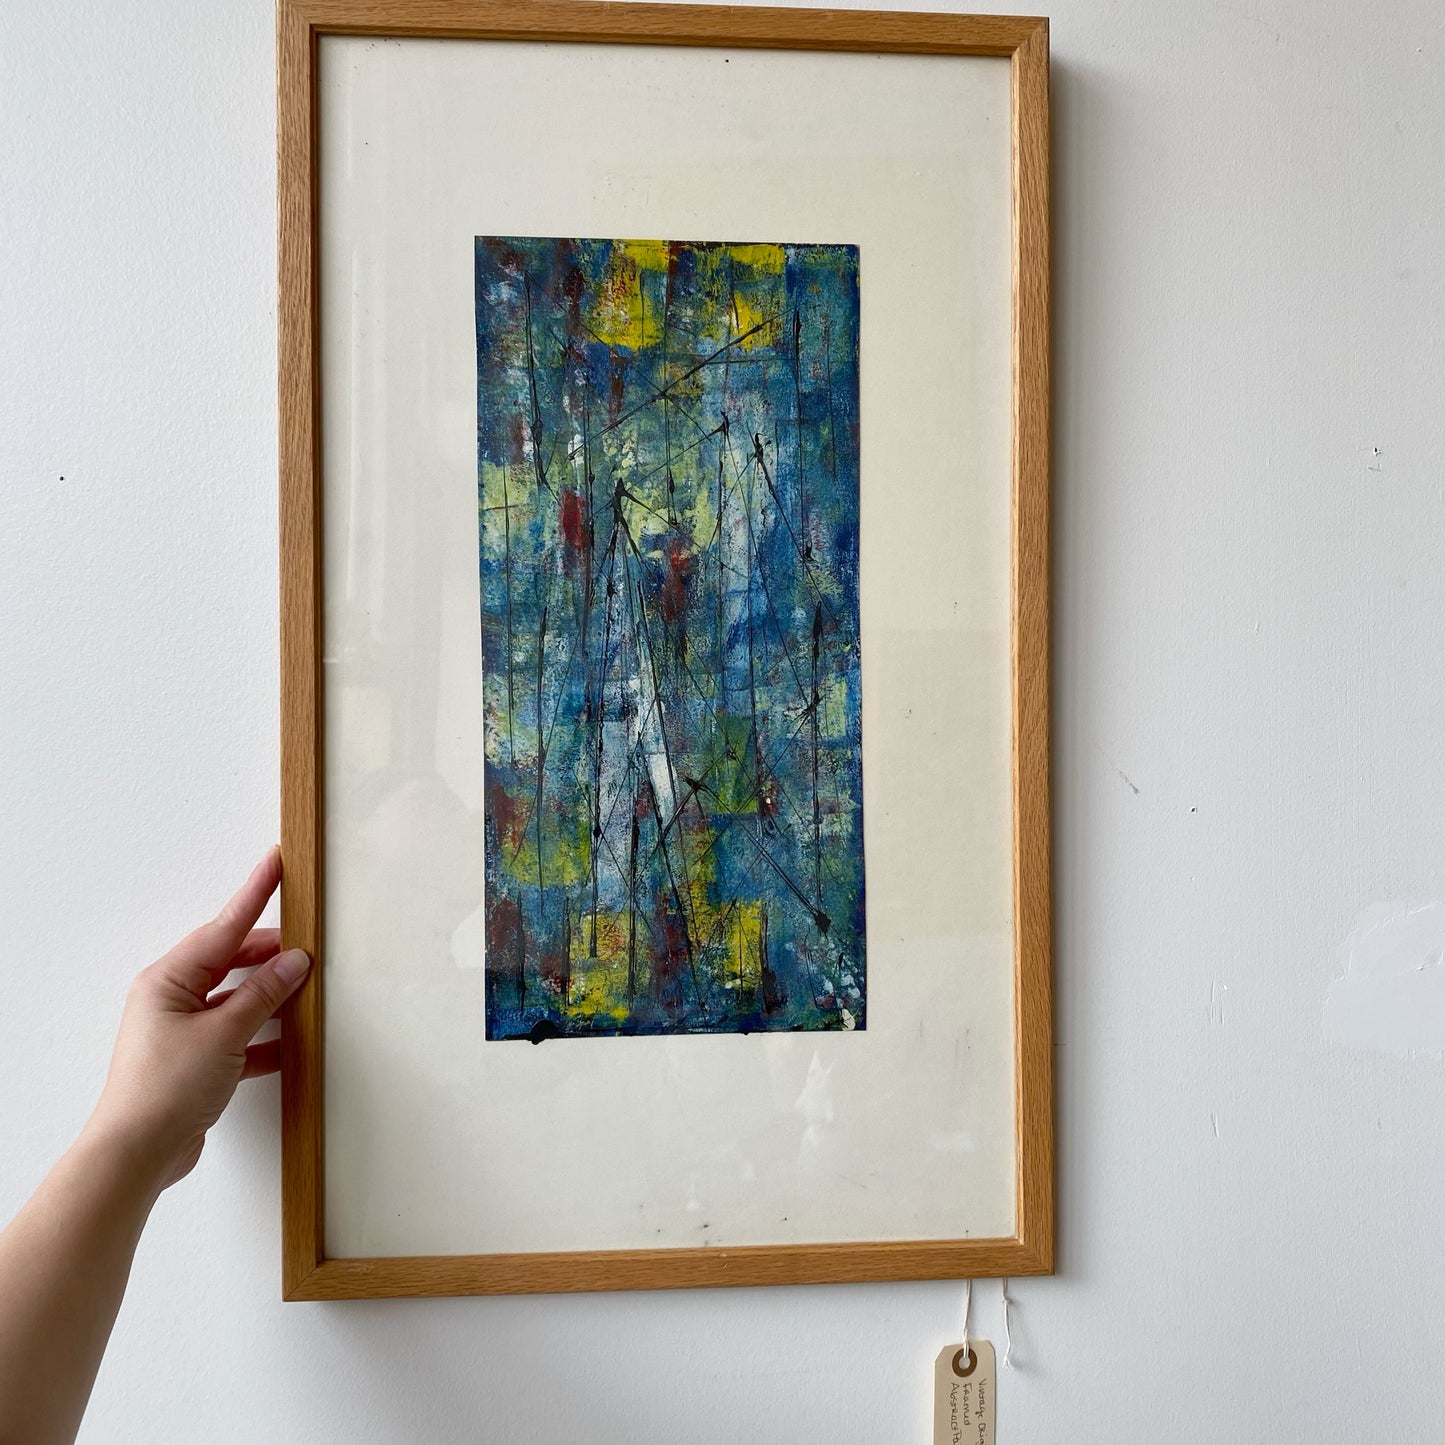 Original Vintage Framed Abstract Painting (15" x 25")